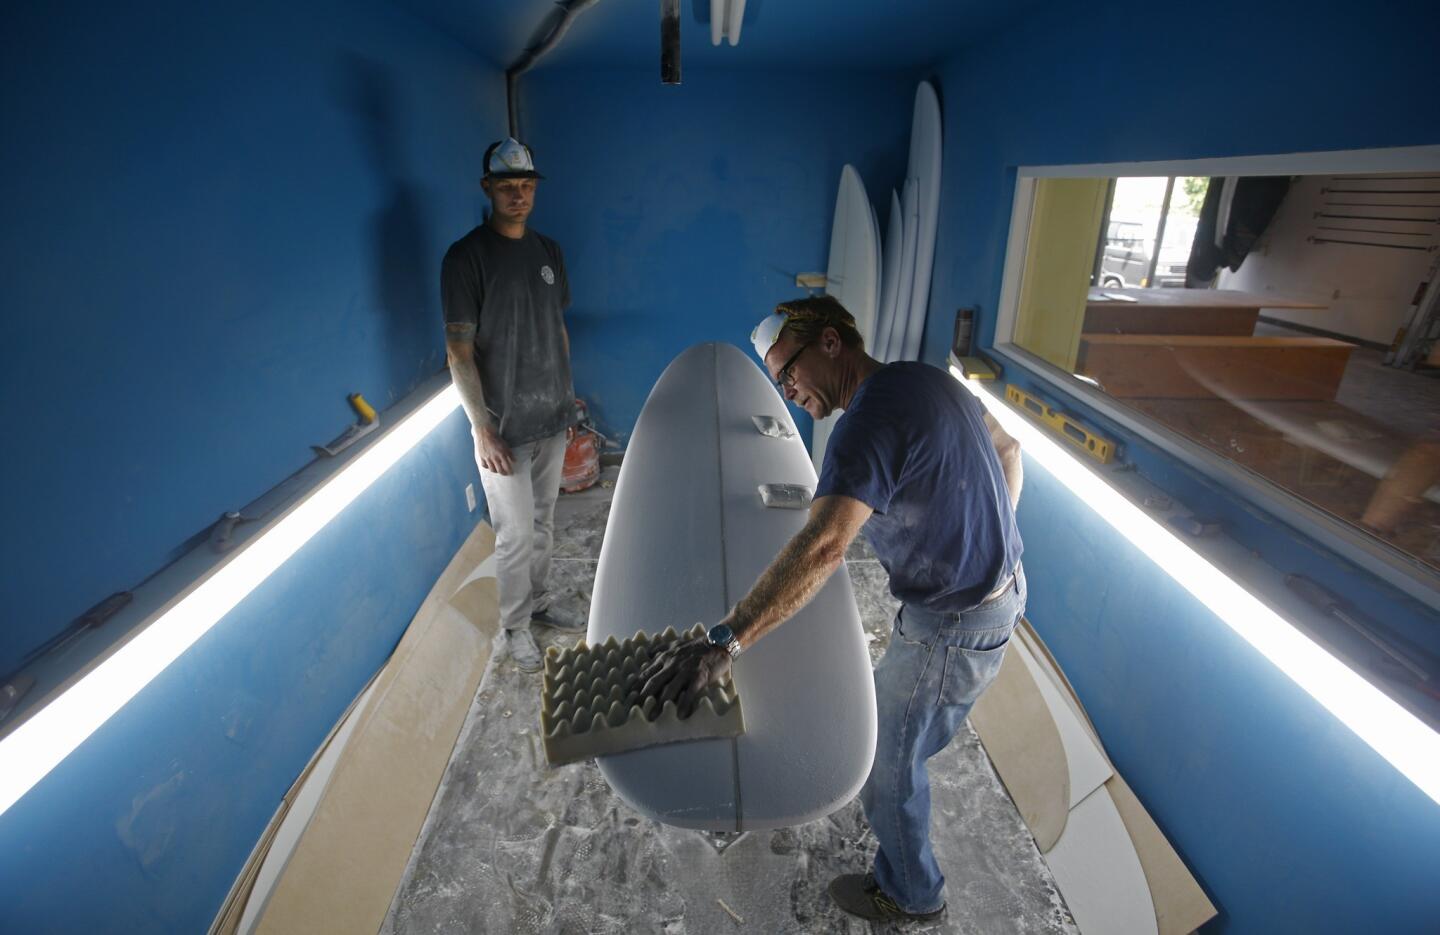 Build your own surfboard